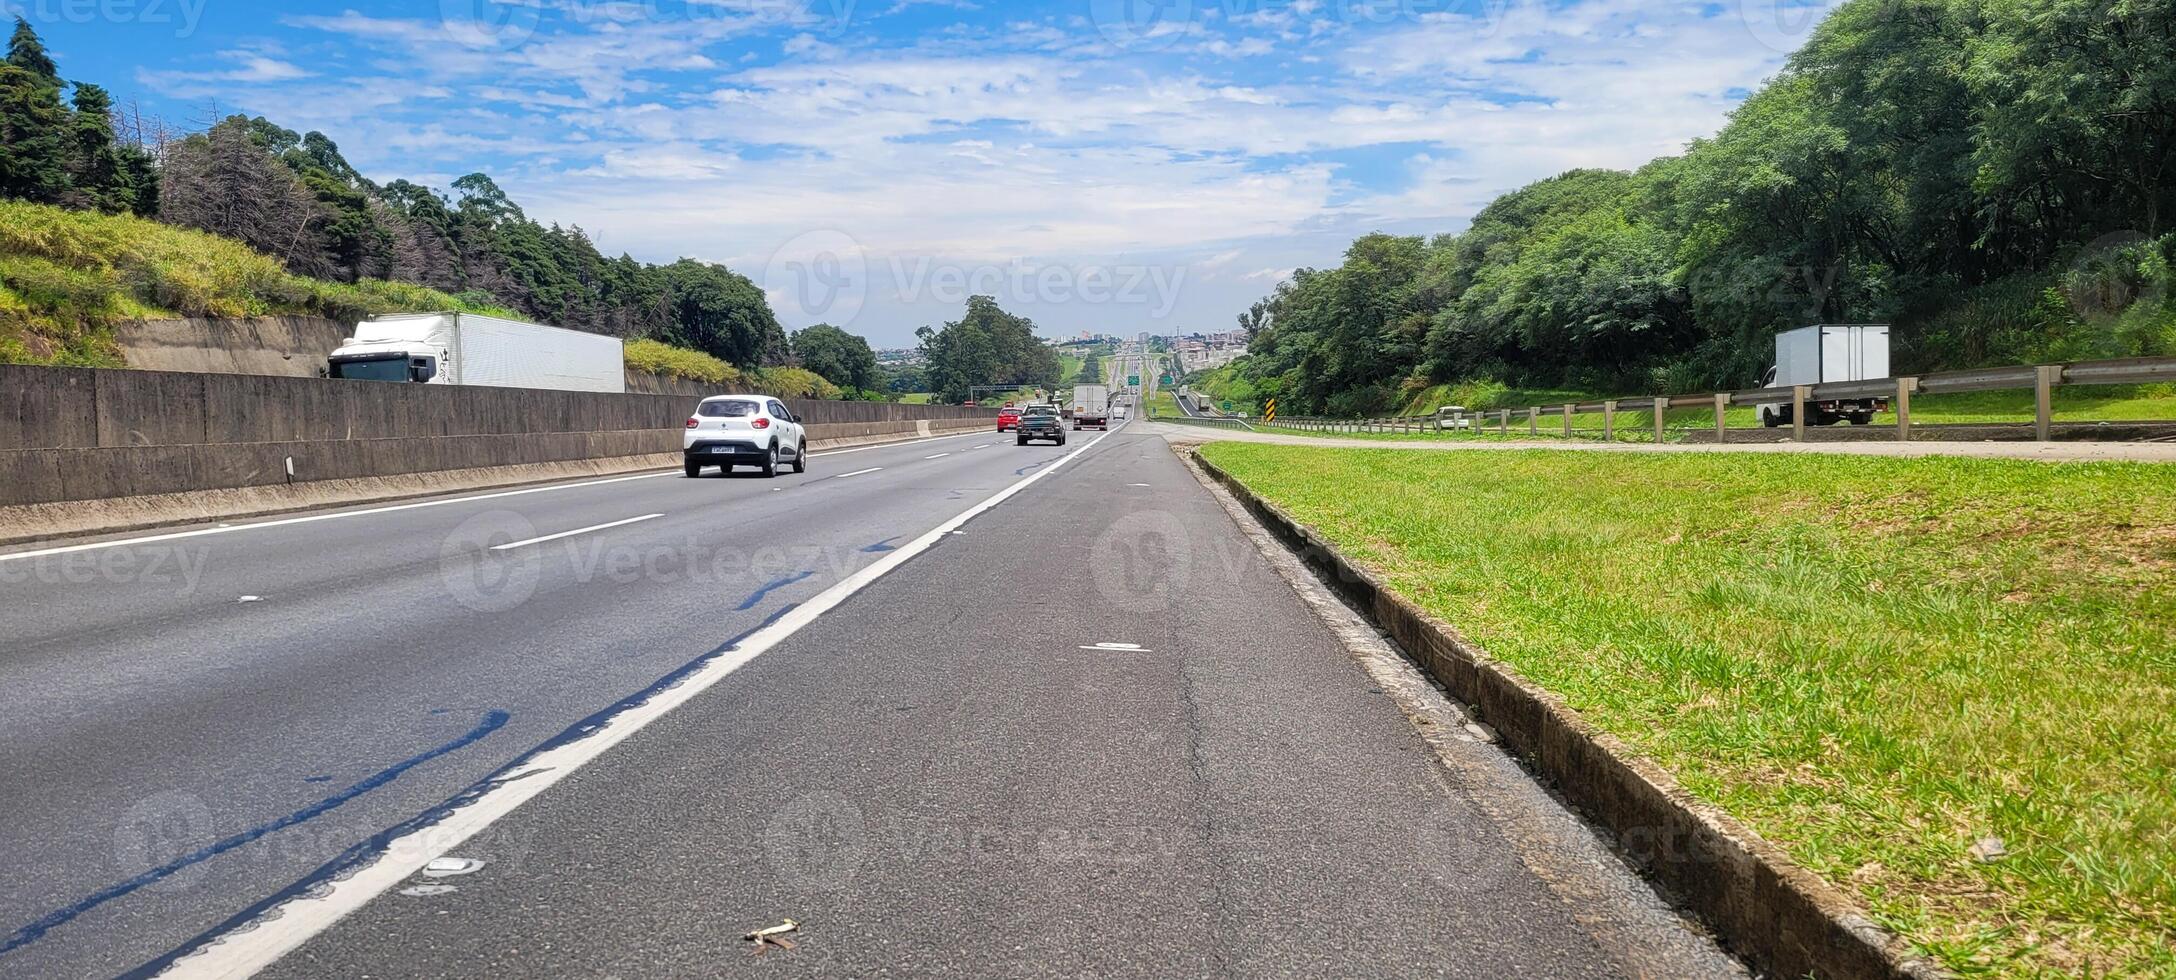 paved road with cars passing by on a sunny day in campinas photo